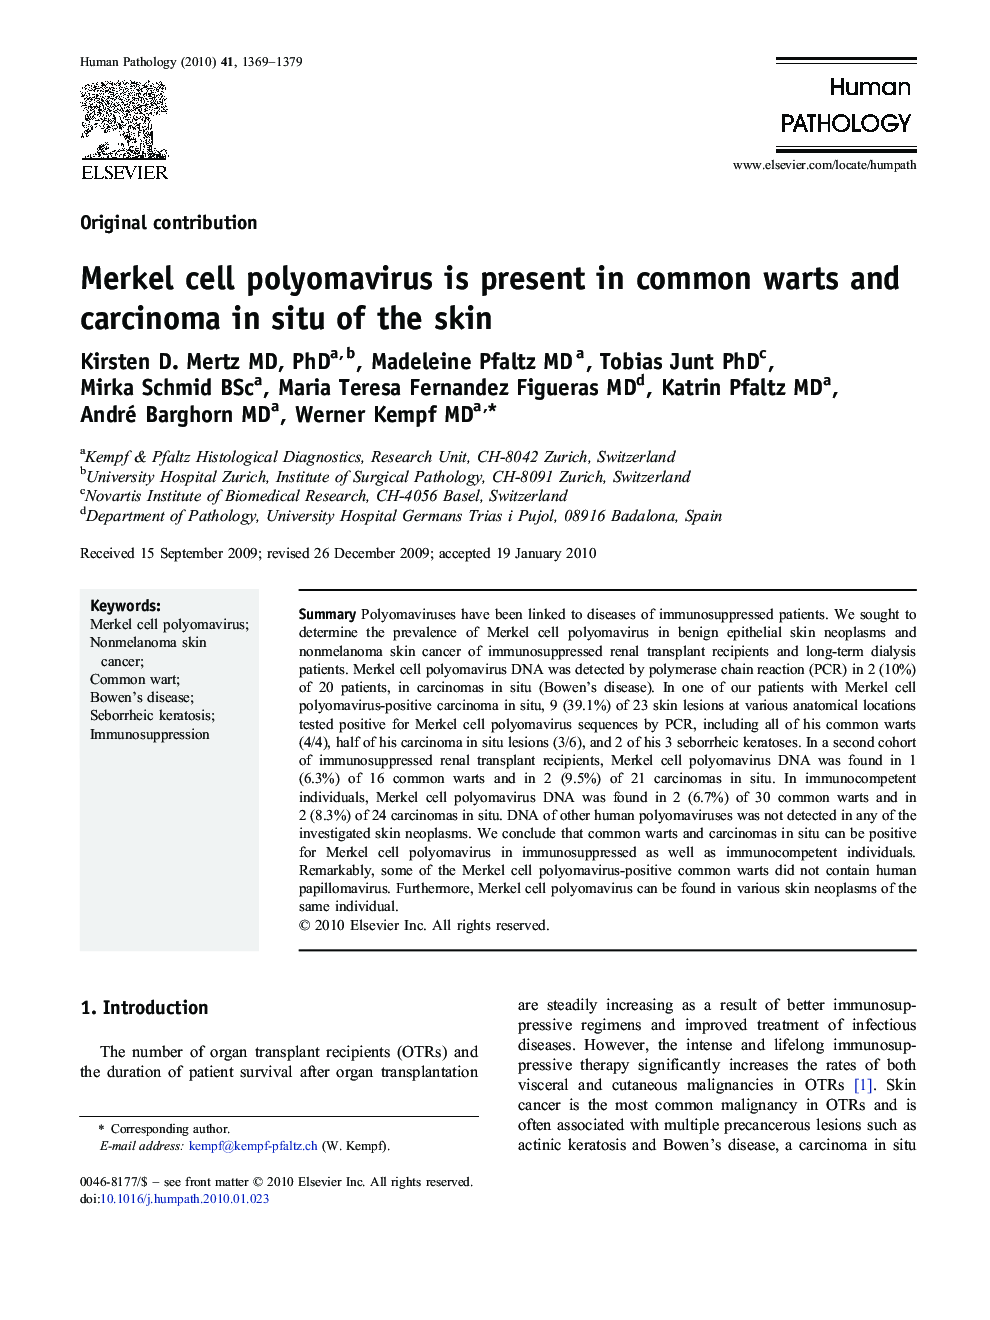 Merkel cell polyomavirus is present in common warts and carcinoma in situ of the skin